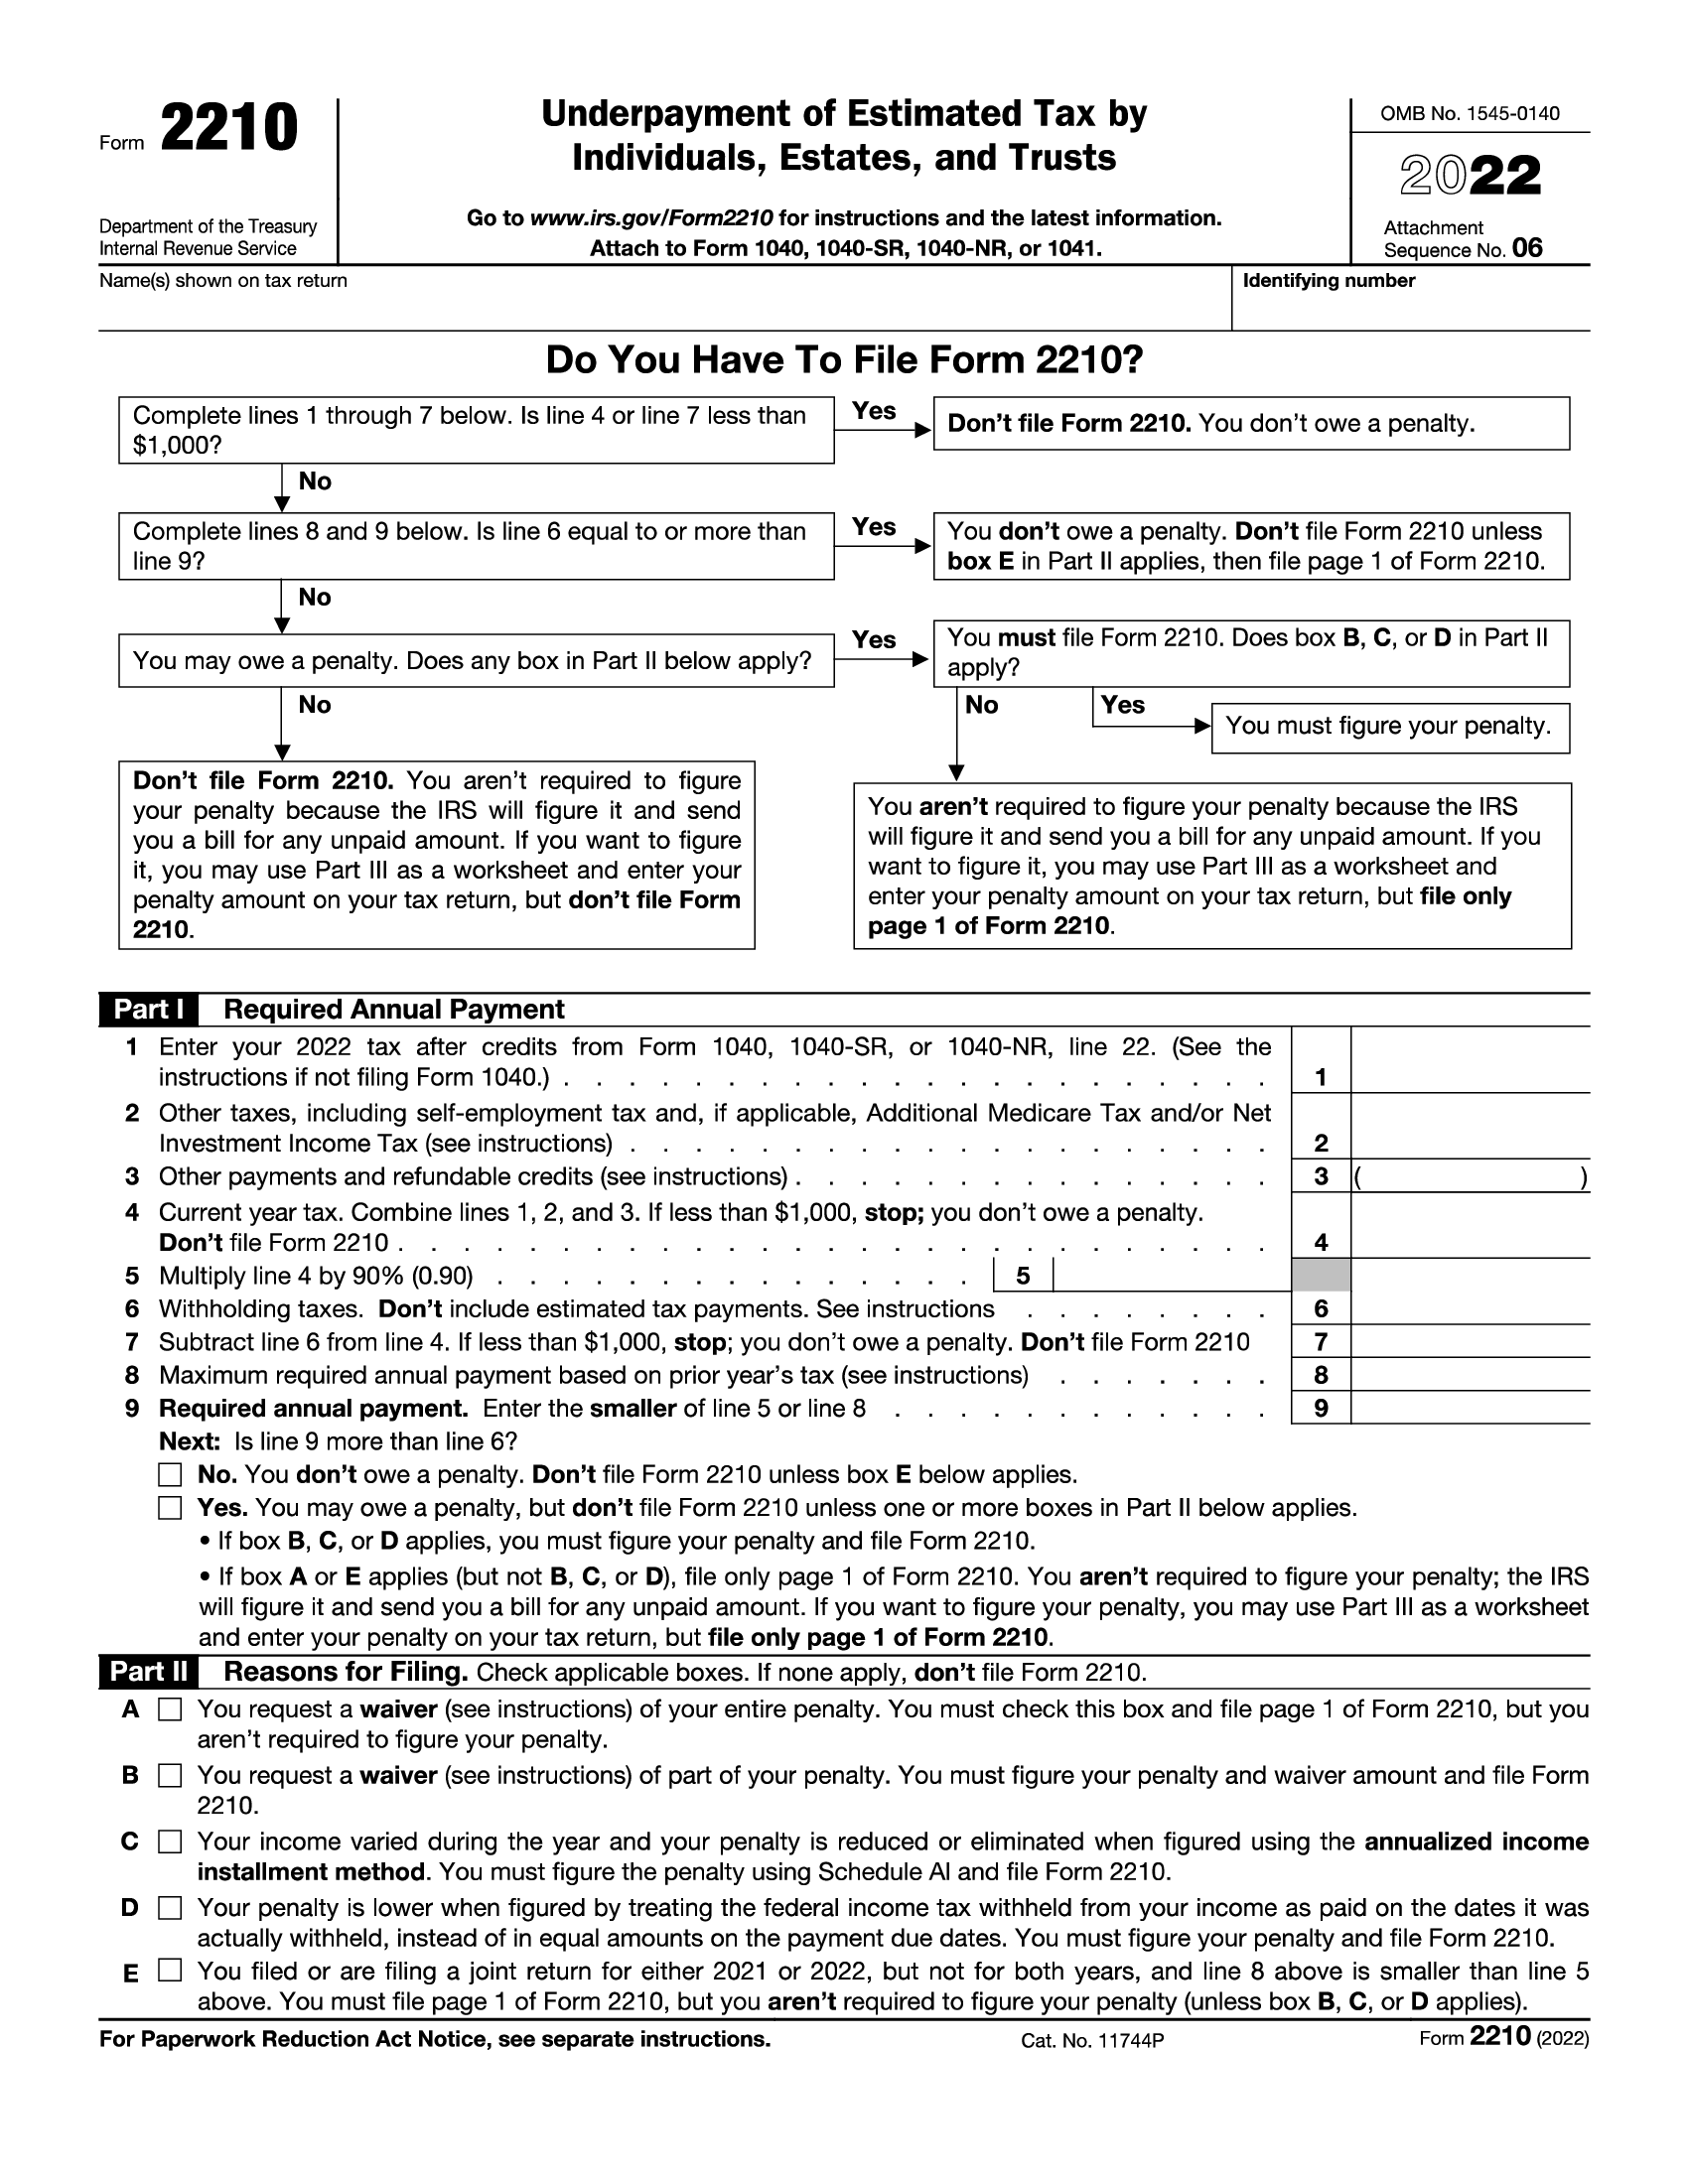 IRS Form 2210. Underpayment of Estimated Tax by Individuals, Estates